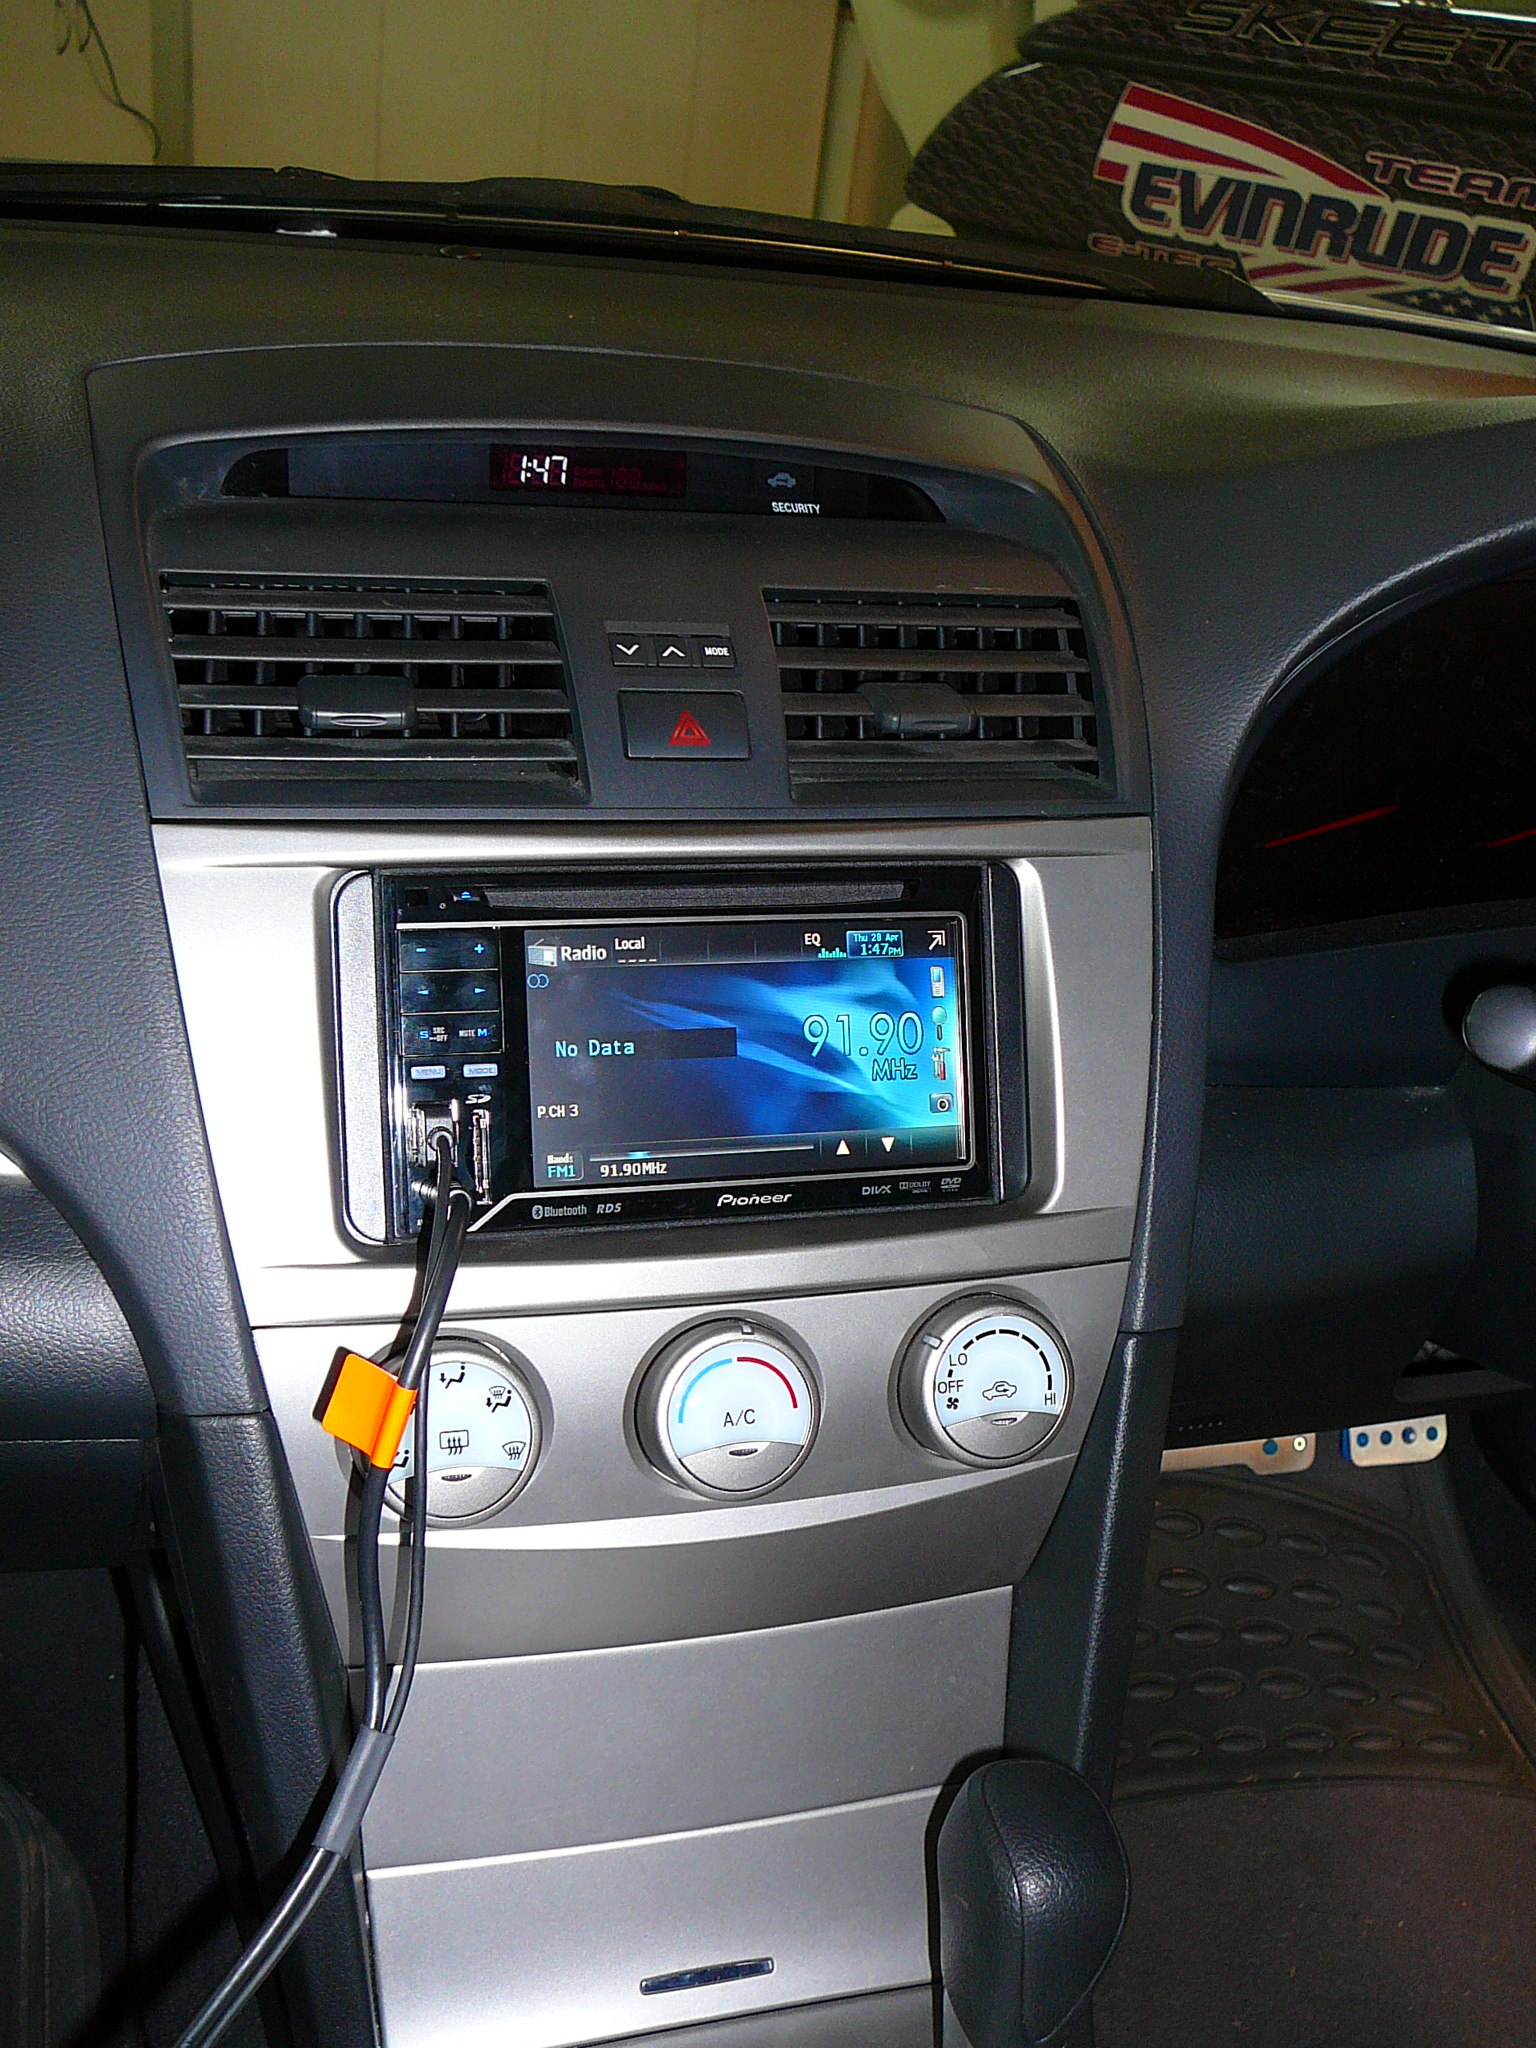 Toyota Avalon Pioneer AVH-P3350DVD and 8 inch Roof Screen